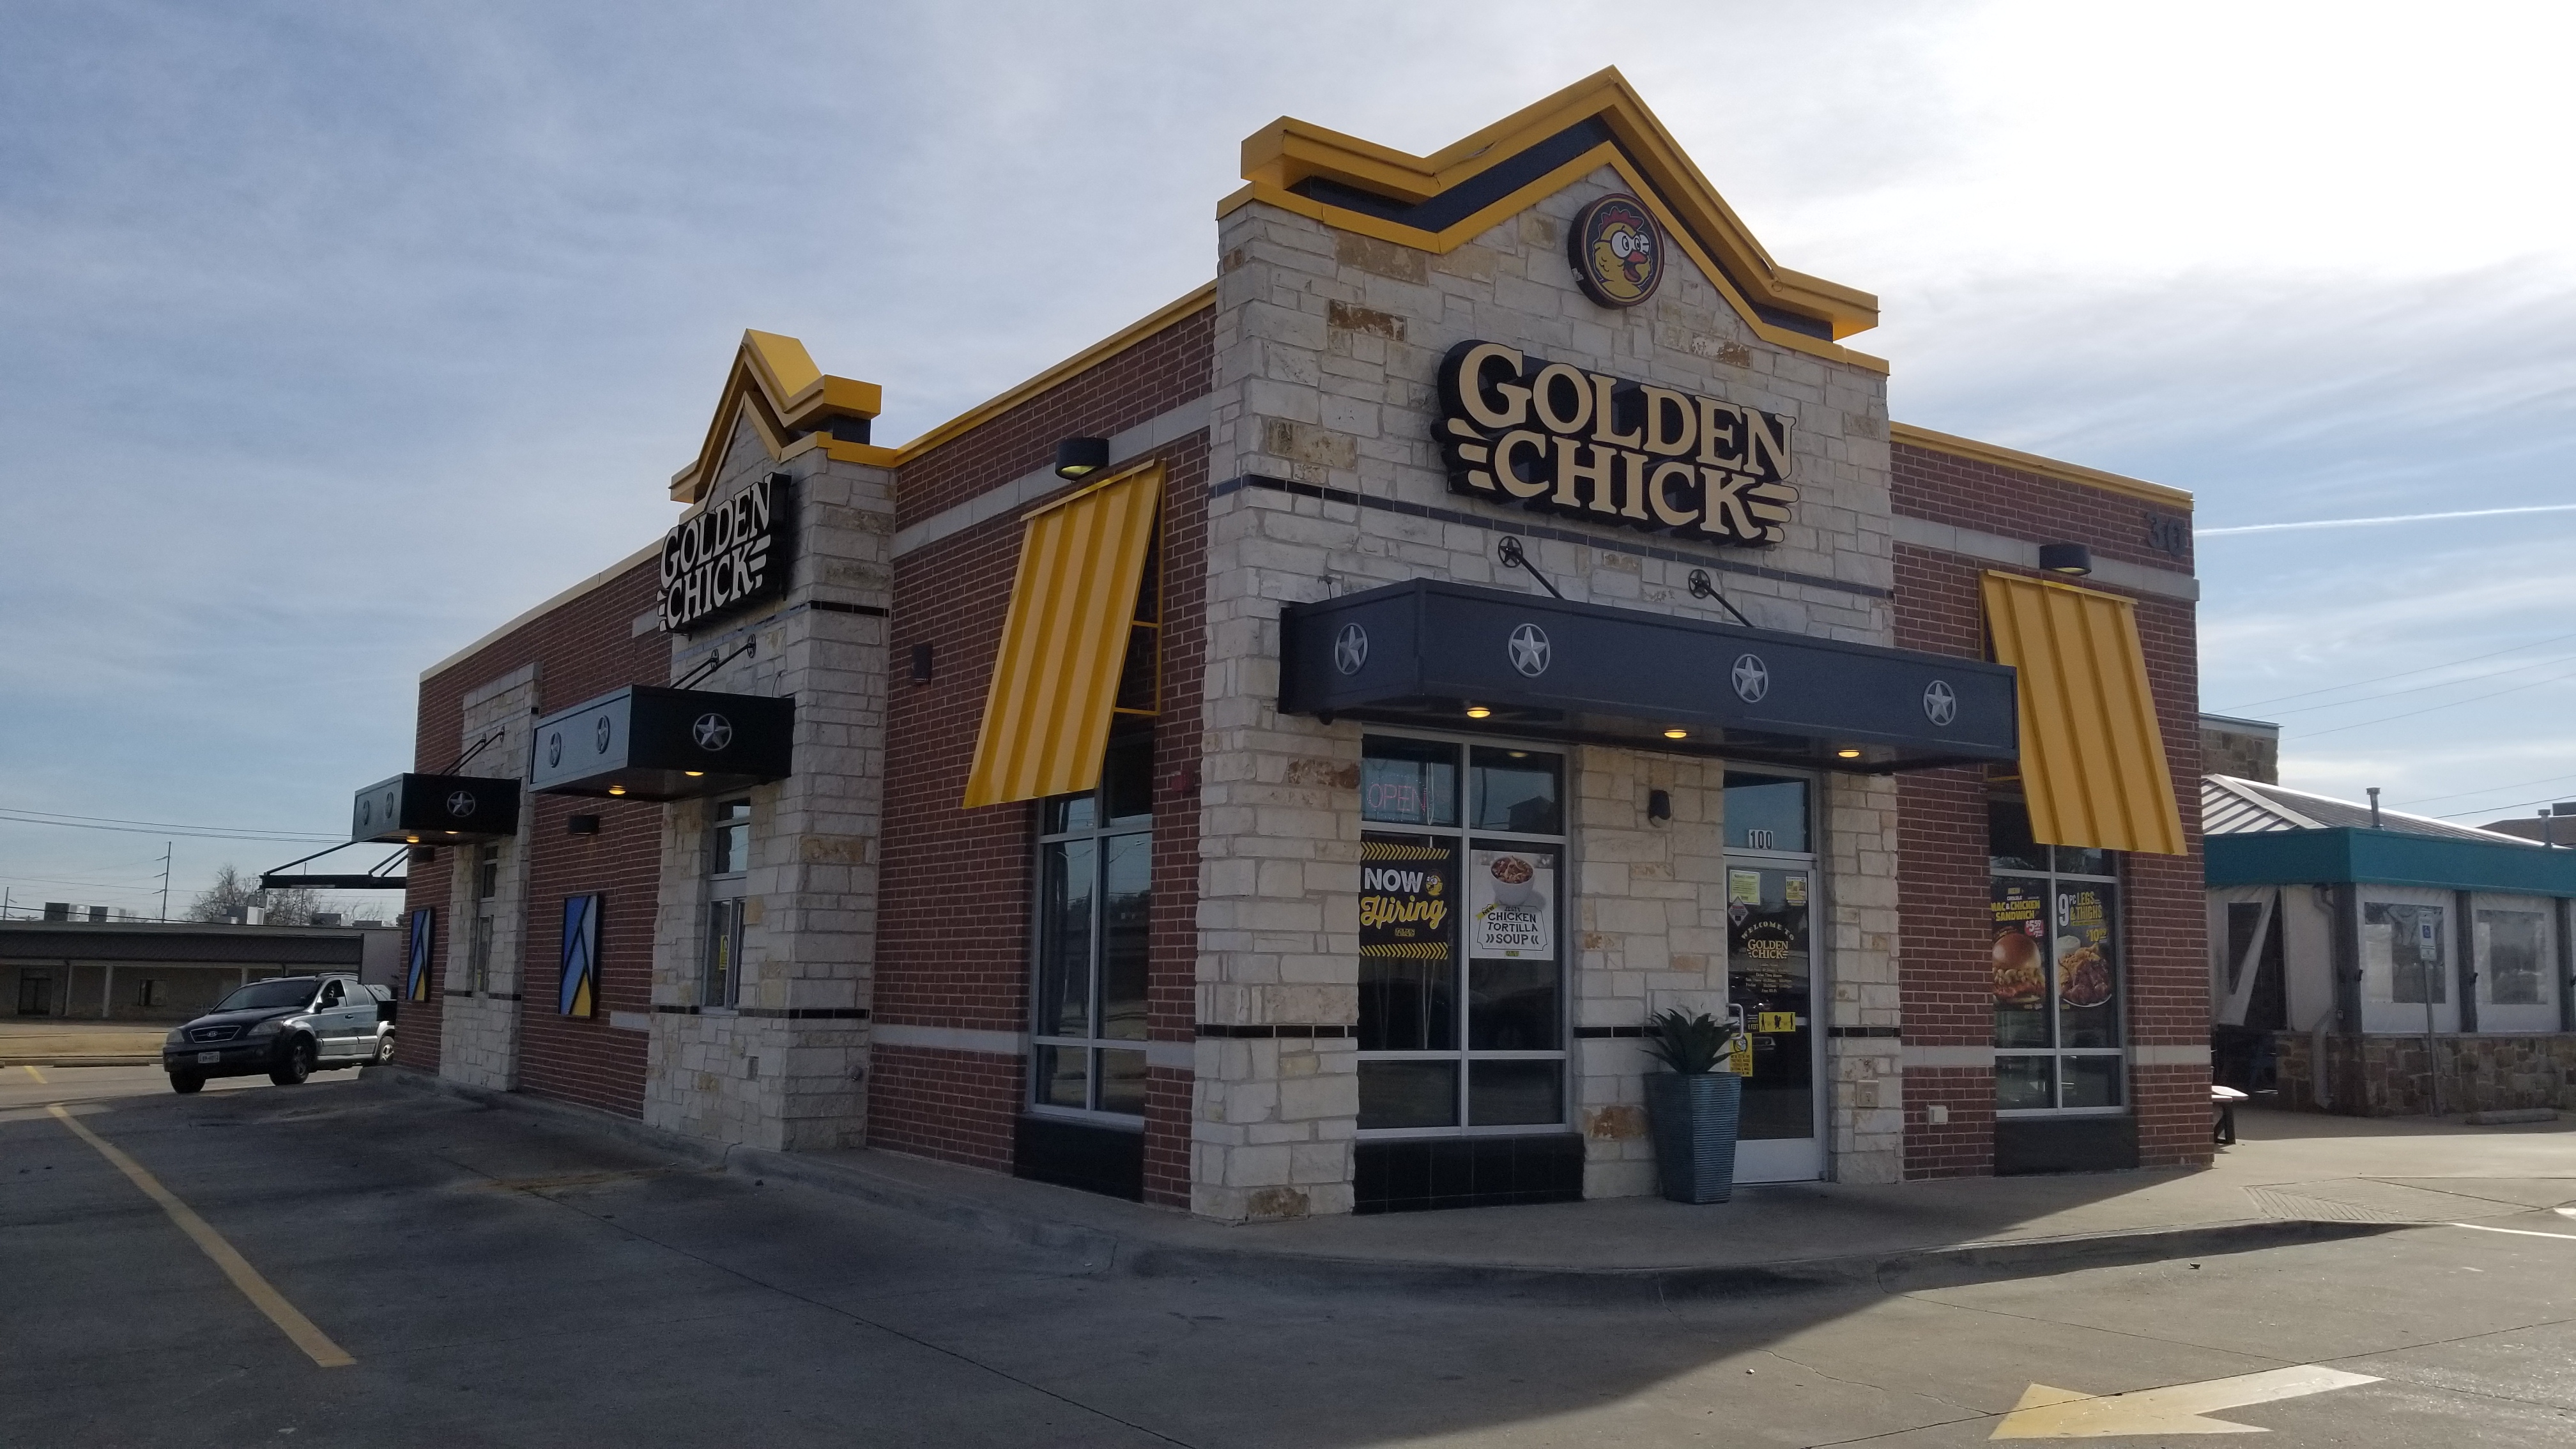 Golden Chick storefront.  Your local Golden Chick fast food restaurant in Garland, Texas